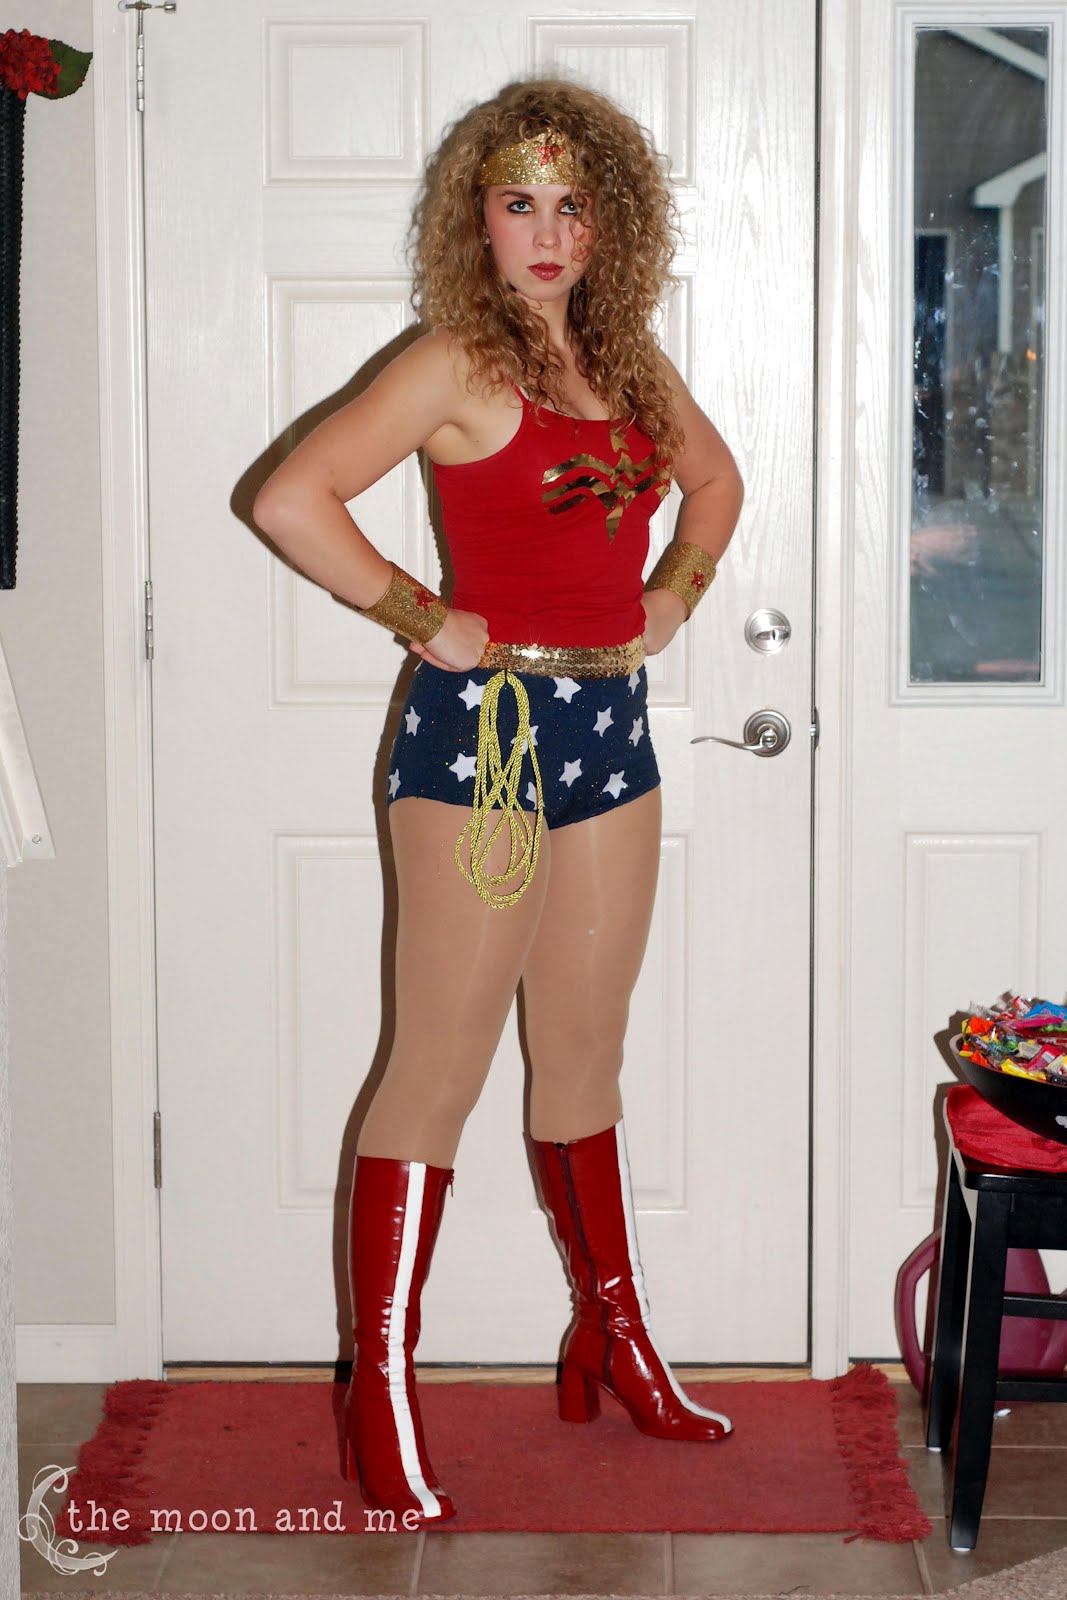 The Moon And Me Diy Wonder Woman Costume-8201